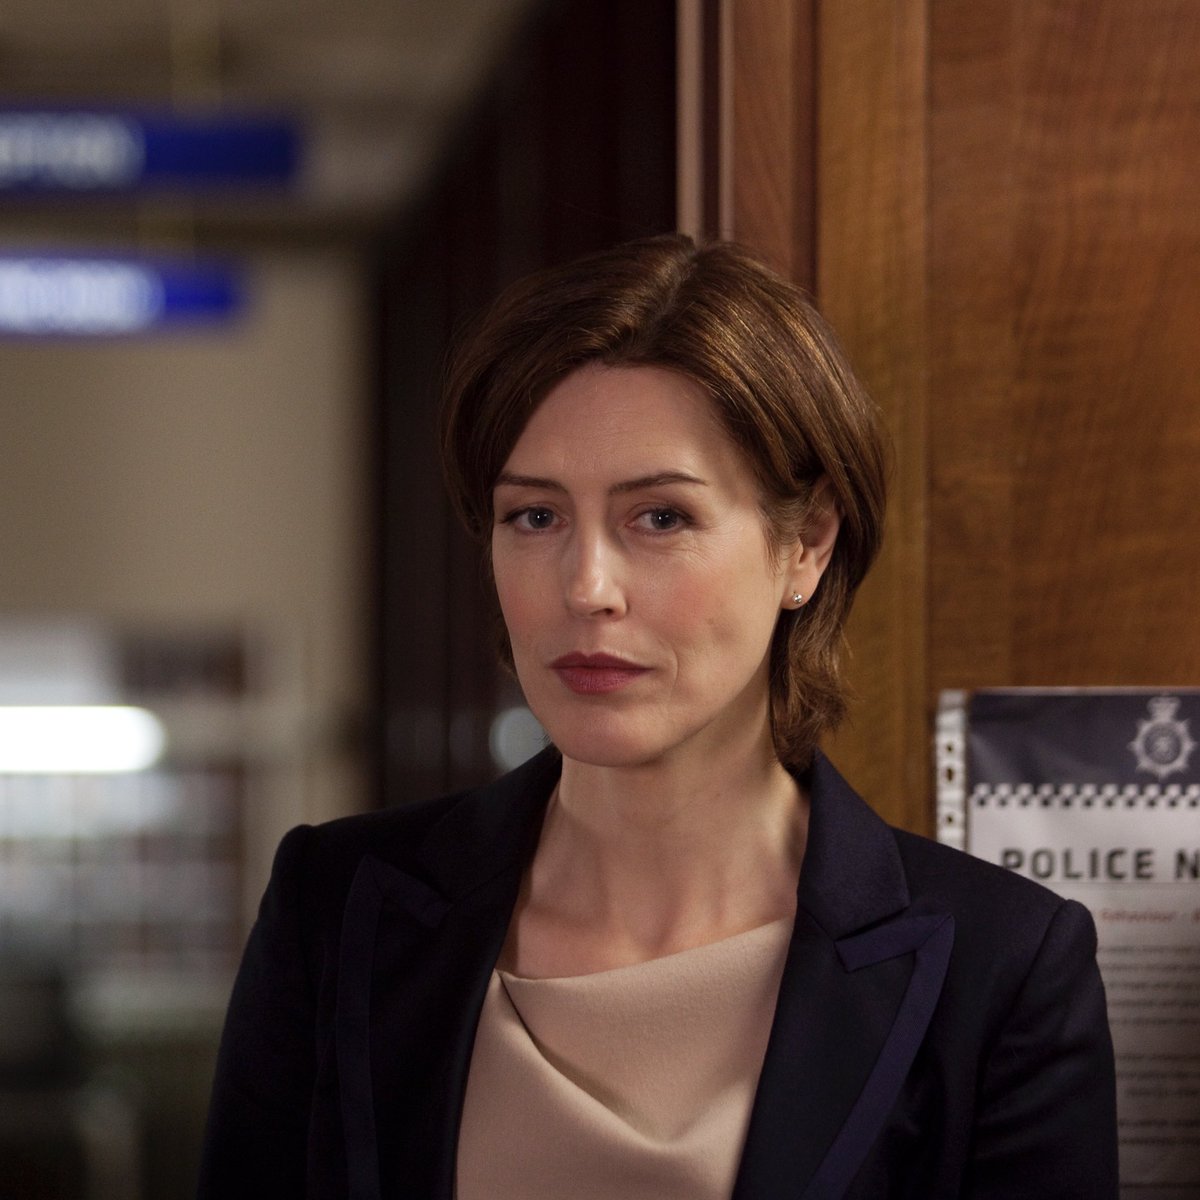 Jed Mercurio on Twitter: "Monday 9.00 pm ⁦@BBCOne⁩ , watch #LineofDuty  Series 1 and get to see the first ever appearances of Dot (⁦@Cparks1976⁩),  Nigel (Neil Morrissey), Jackie Laverty (Gina McKee), Hilton (